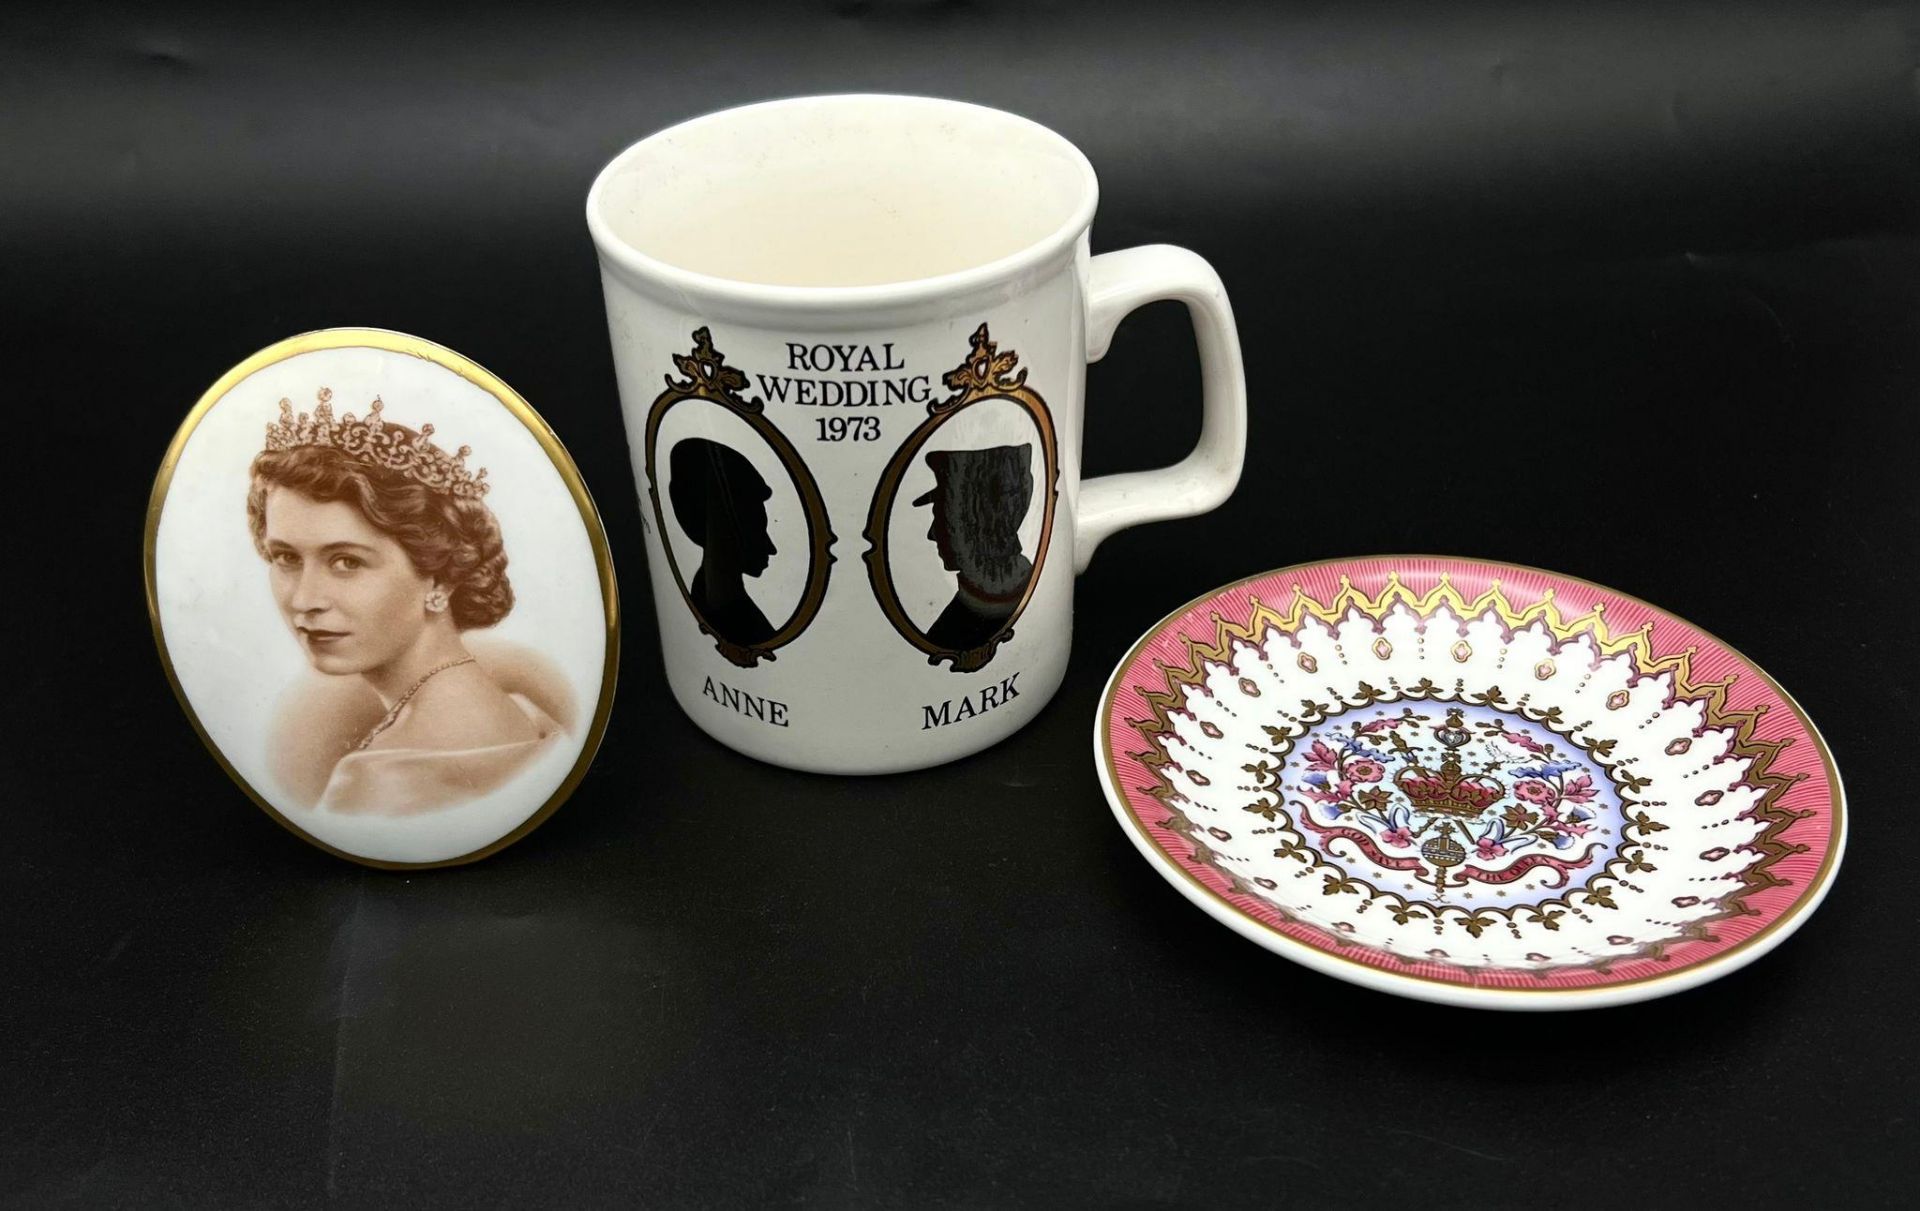 Three Pieces in Commemoration of The Royal Family, The Wedding of Princess Anne to Mark Phillips